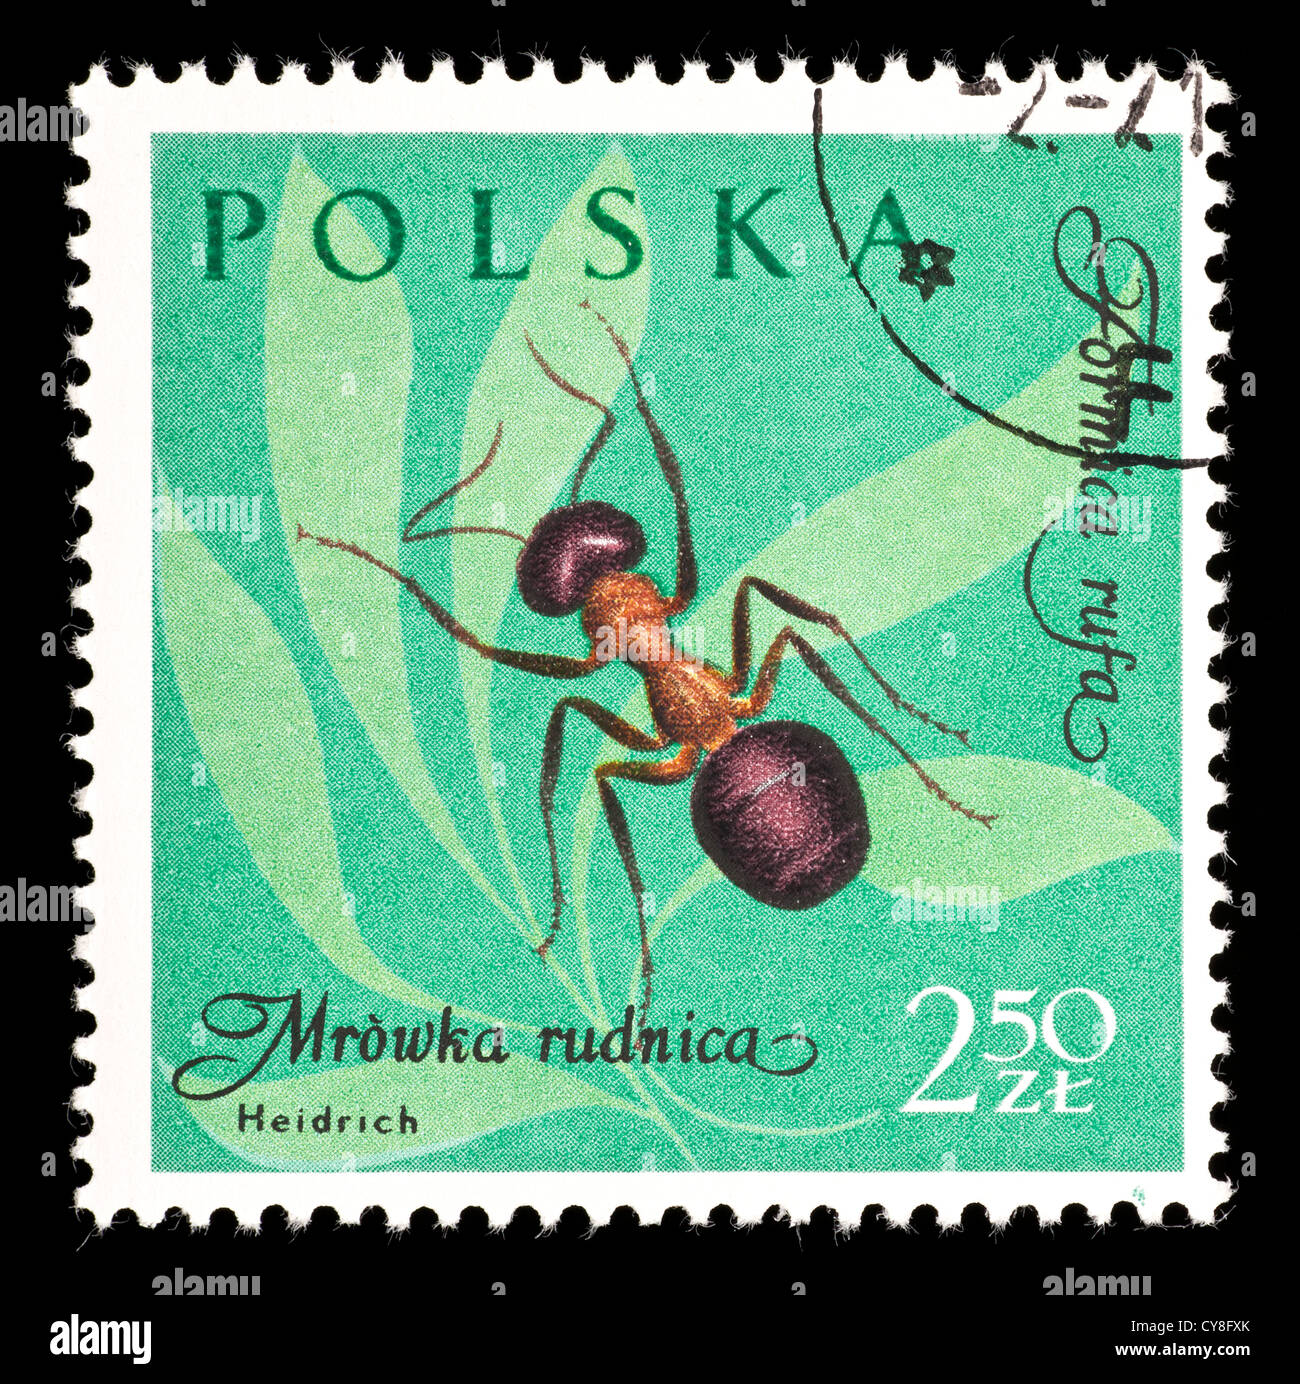 Postage stamp from Poland depicting a southern wood ant or horse ant (Formica rufa) Stock Photo